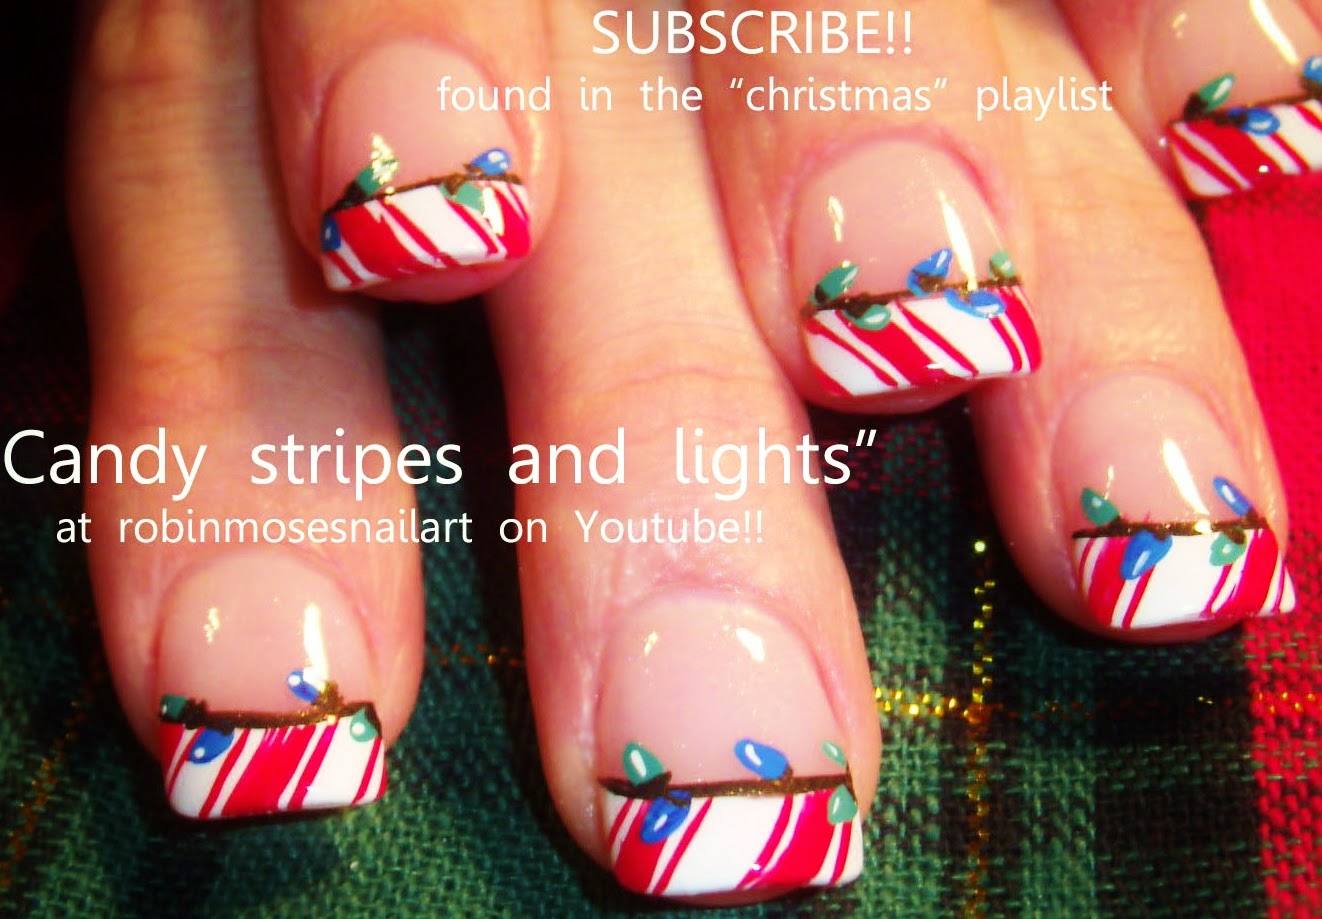 4. Christmas Candy Cane Nail Art on Pinterest - wide 8